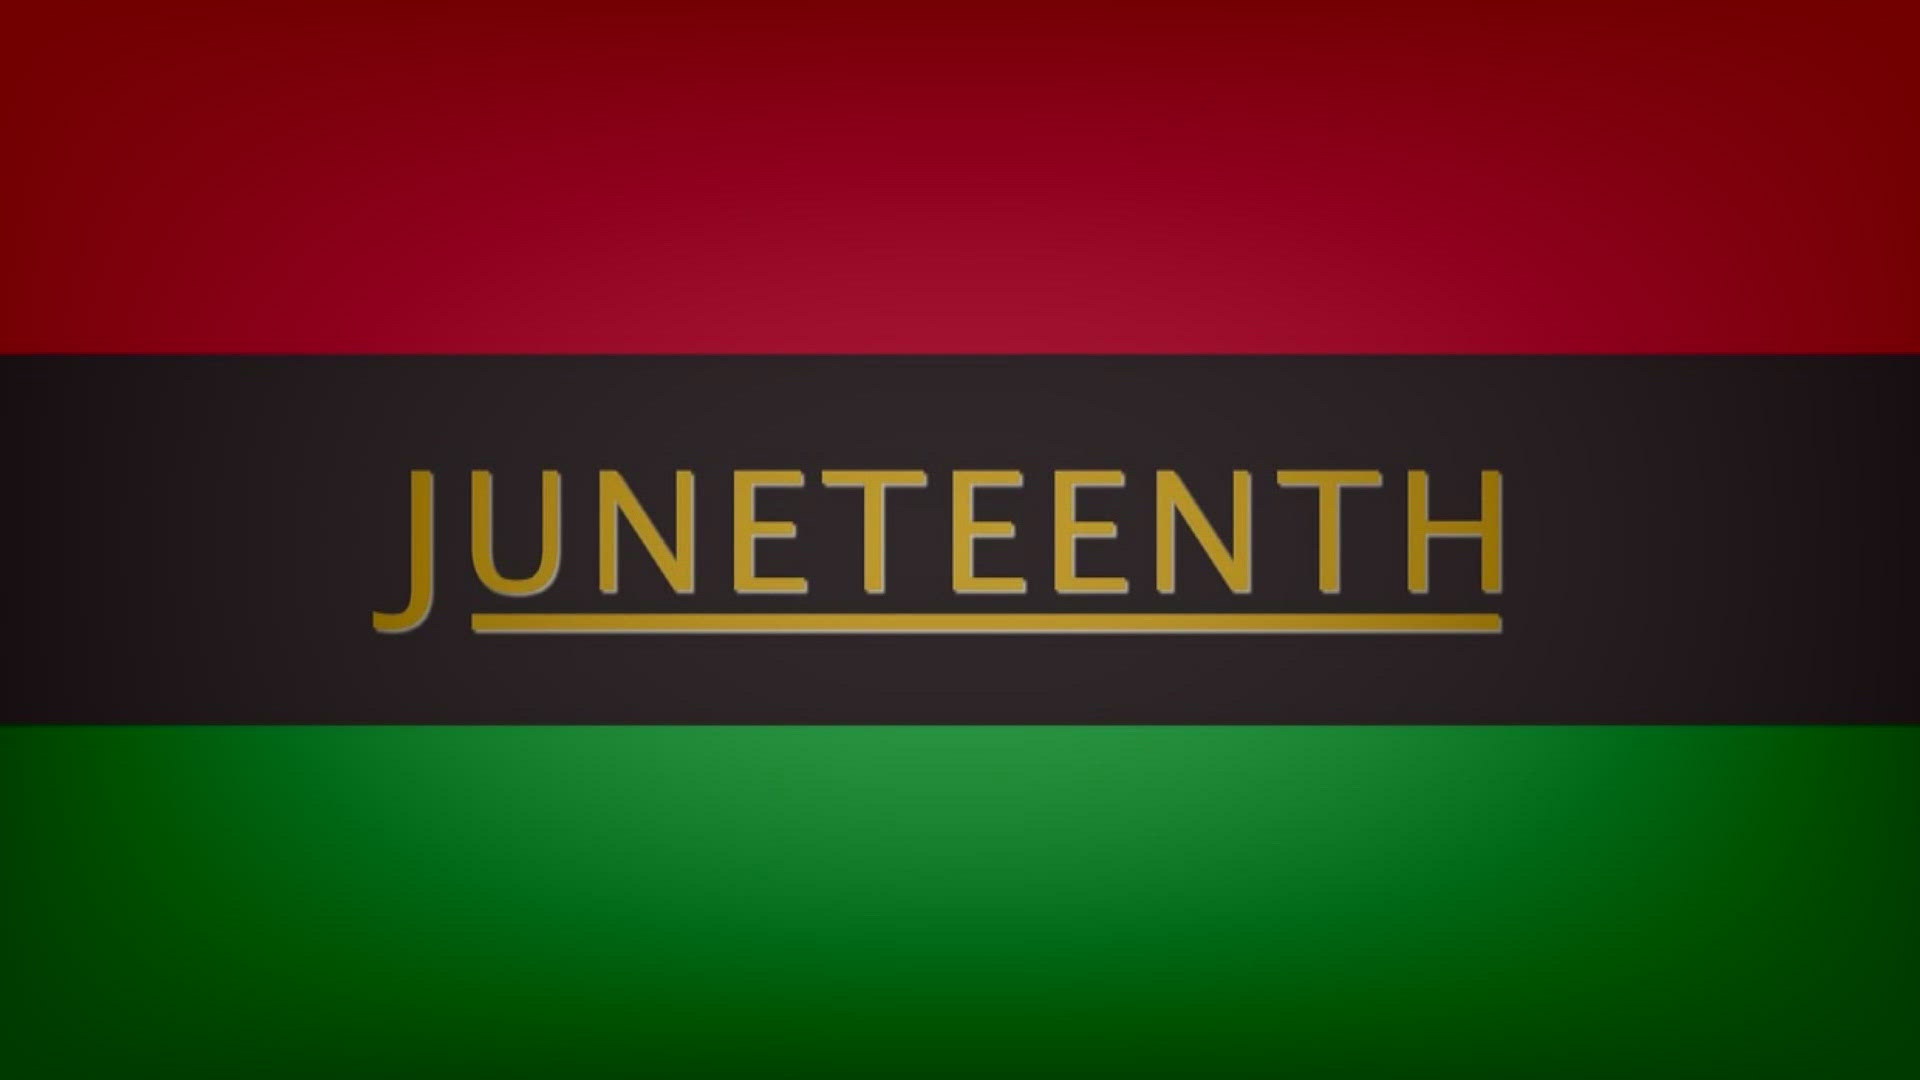 WFMY News 2’s Manning Franks examines the history of Juneteenth.